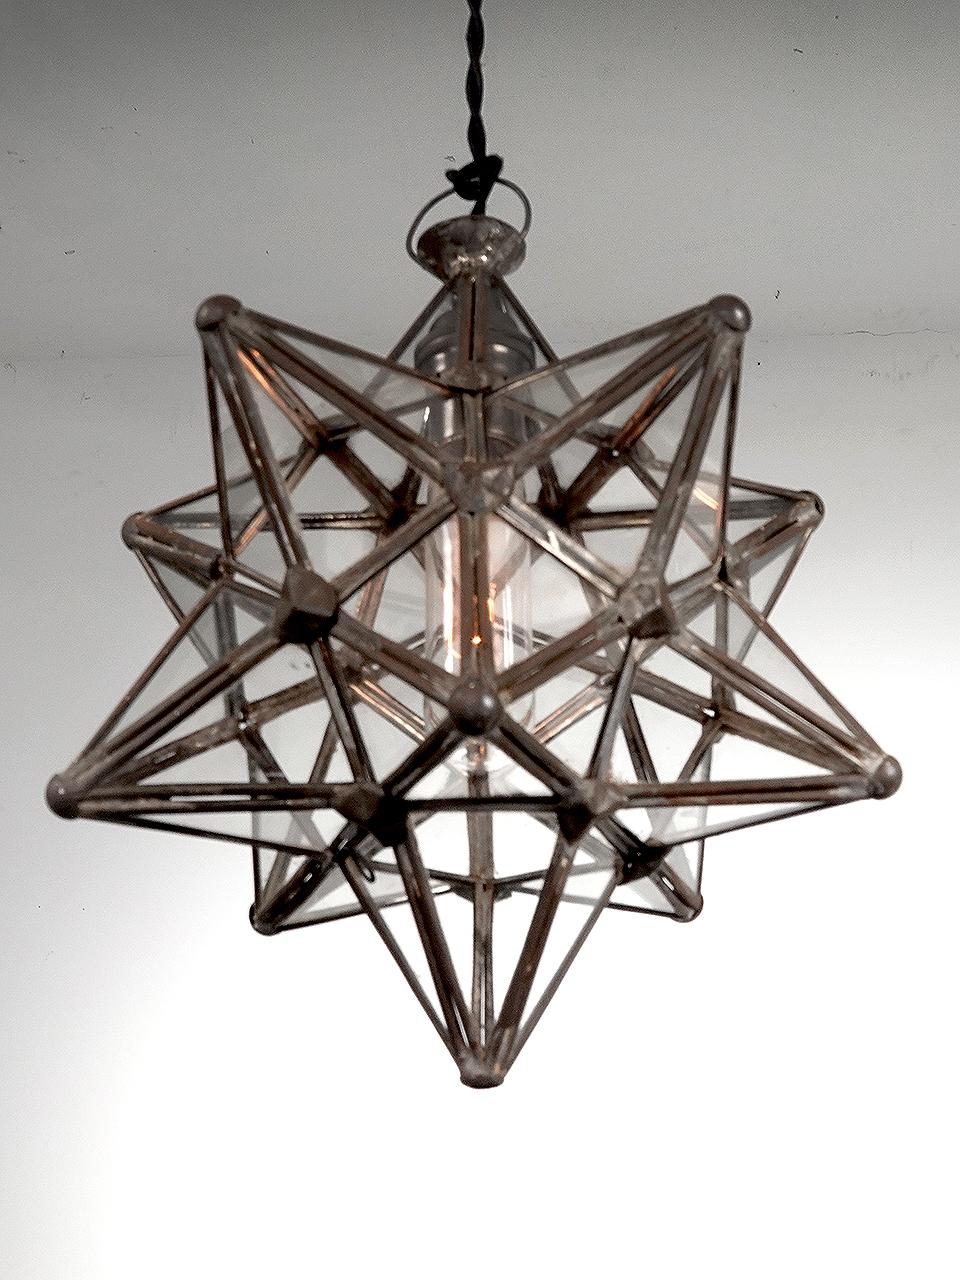 This is an early example of a hand-made and classic Moravian Pendent. You can see the aged patina in the close-up photos. All the glass is intact. These lamps have a great look. The Moravian Star tradition goes back to German schools almost 200